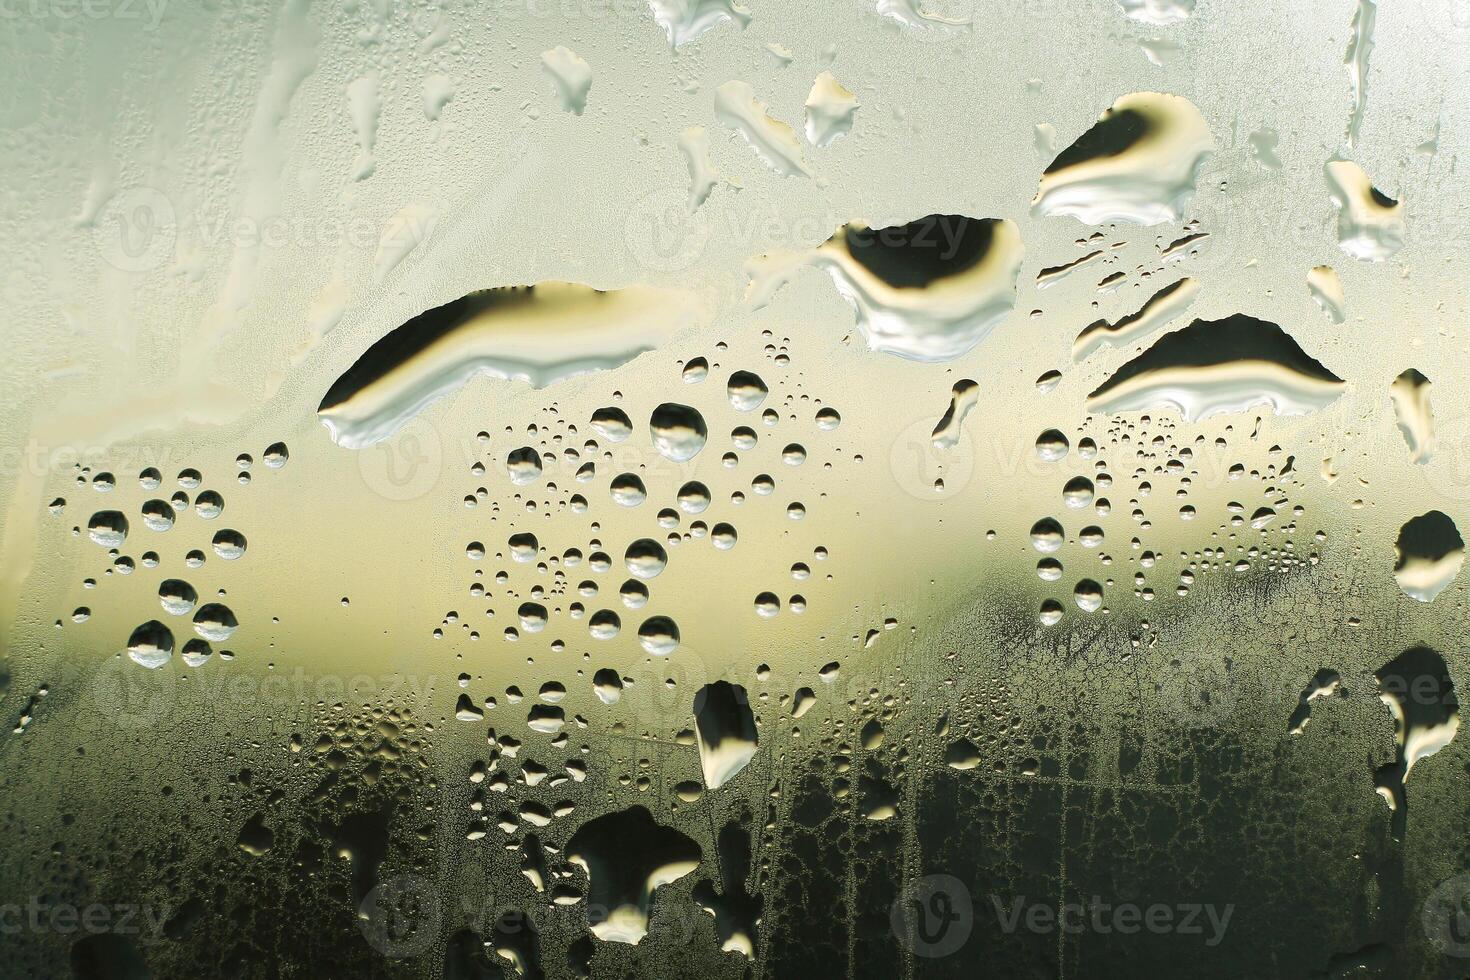 Water drops on glass photo